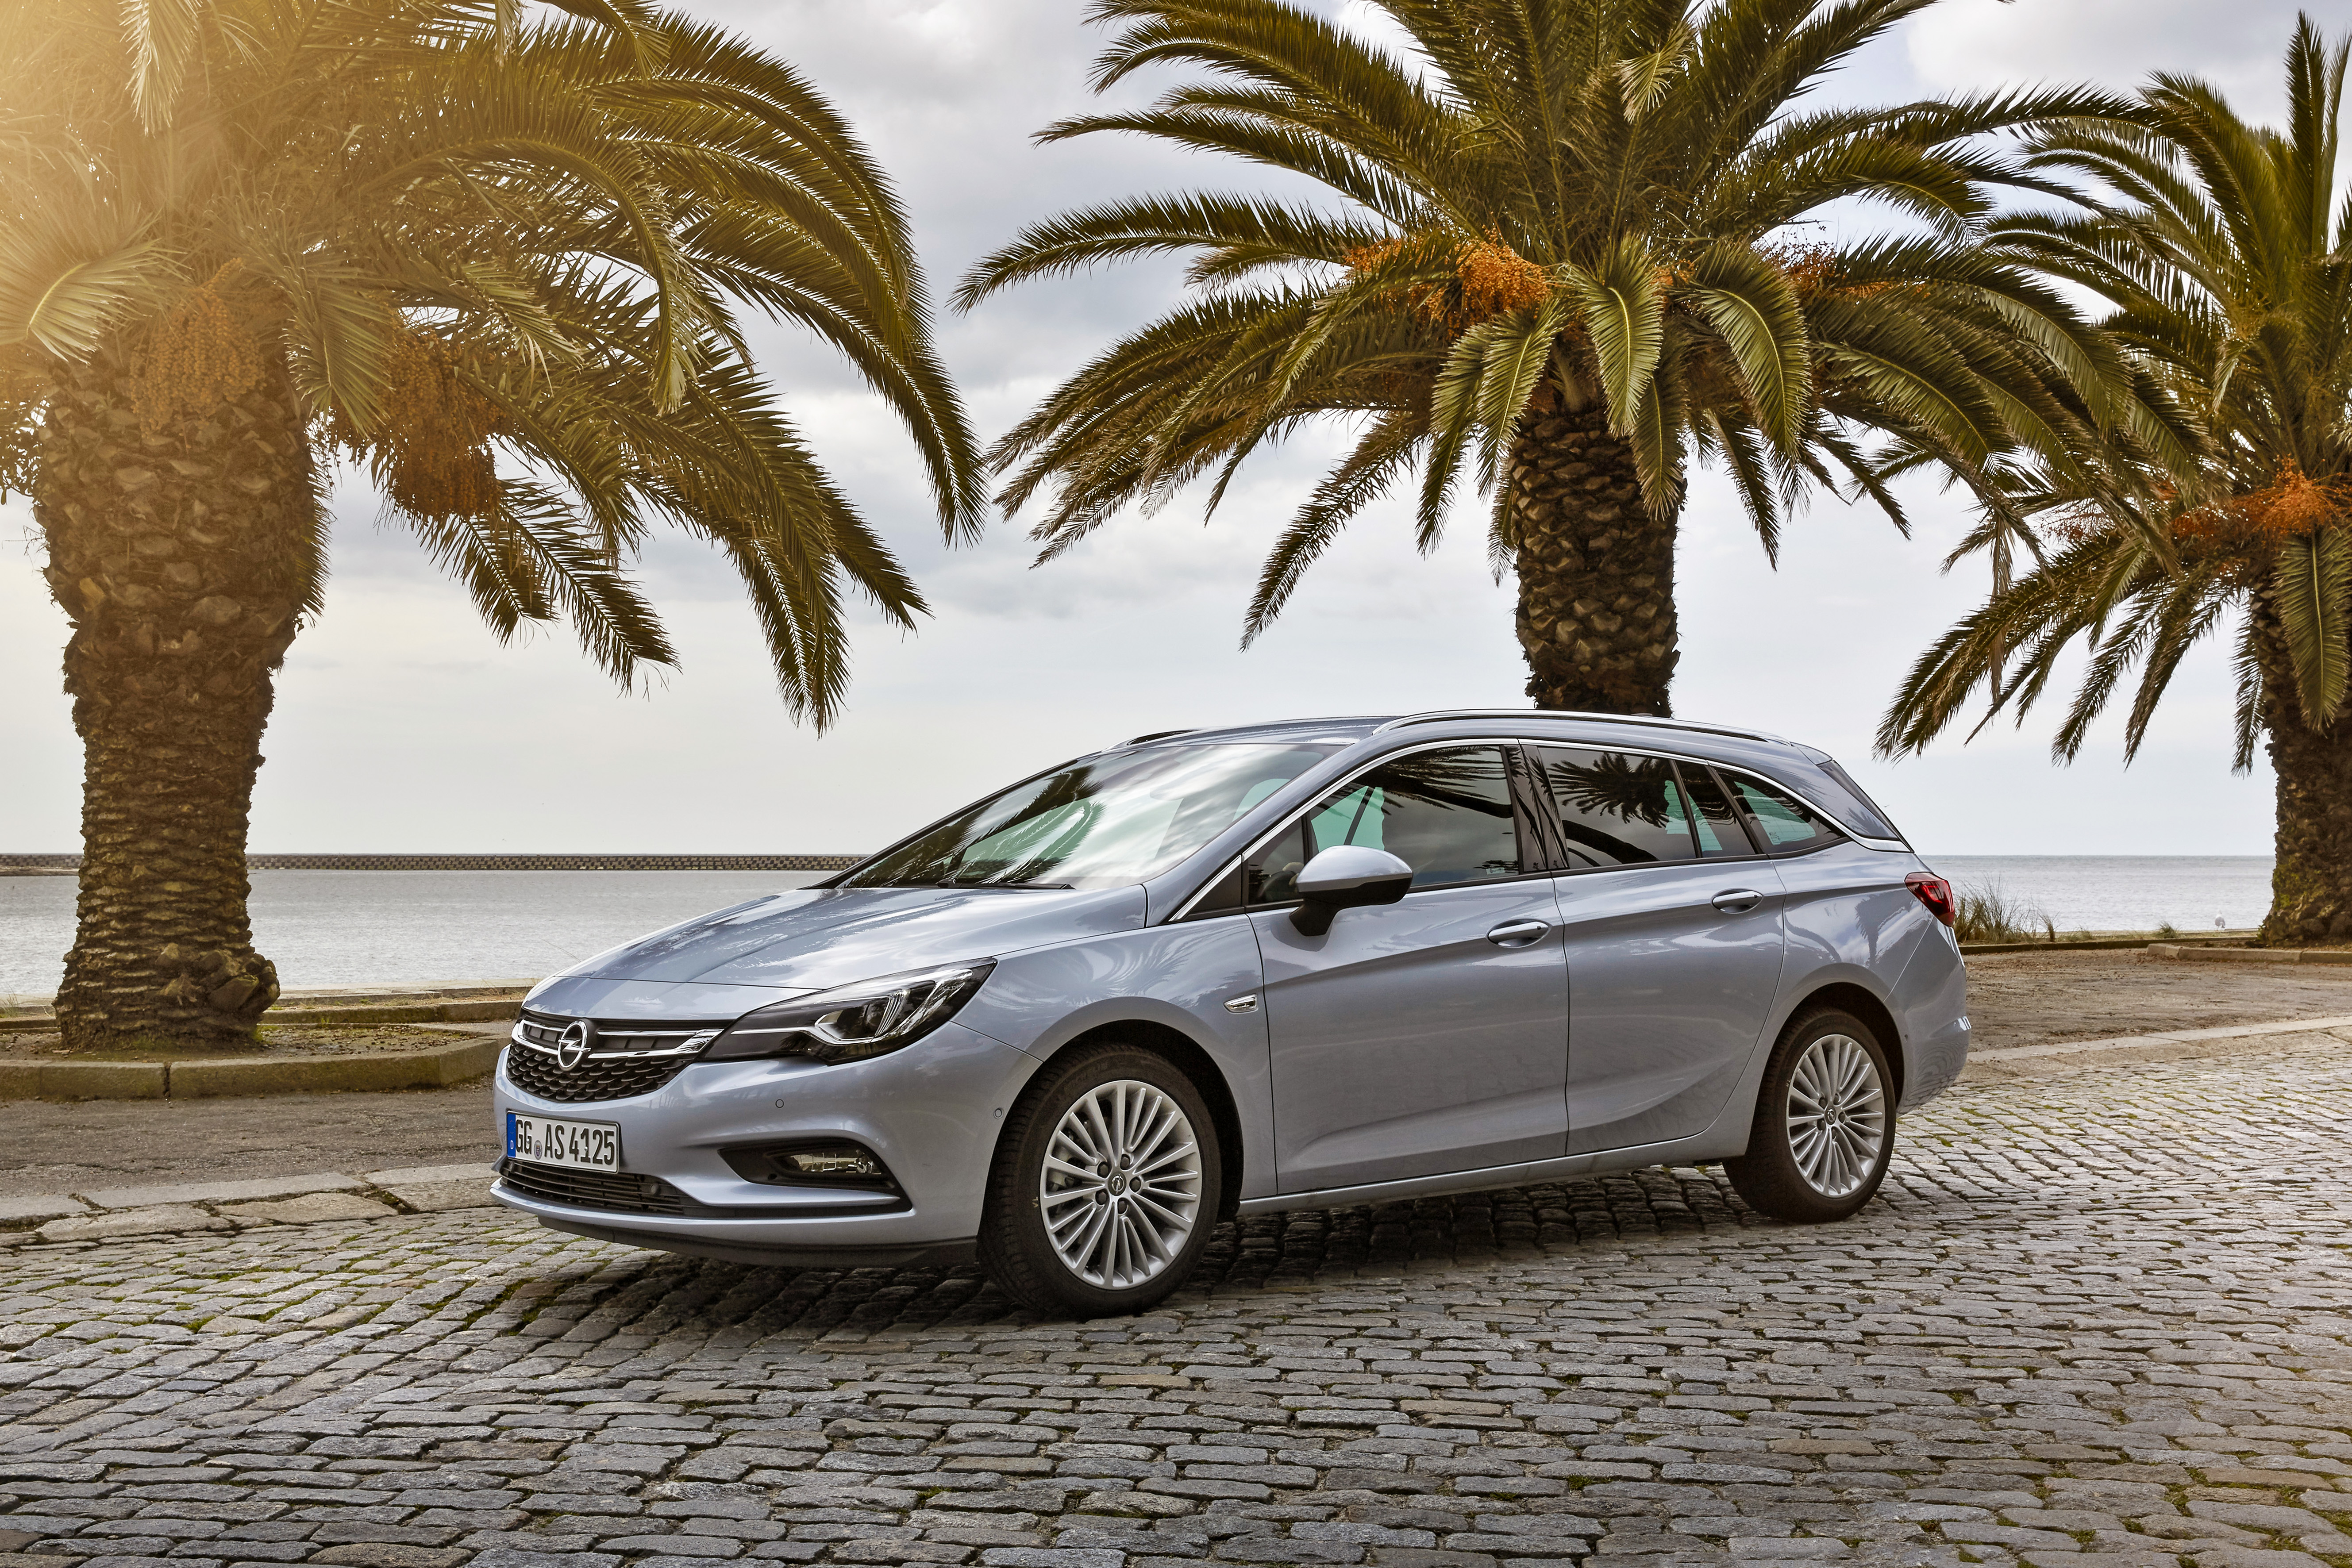 Hassle Free Travel With Opel Astra And Clever Accessories Opel Automobile Gmbh Pressemitteilung Lifepr